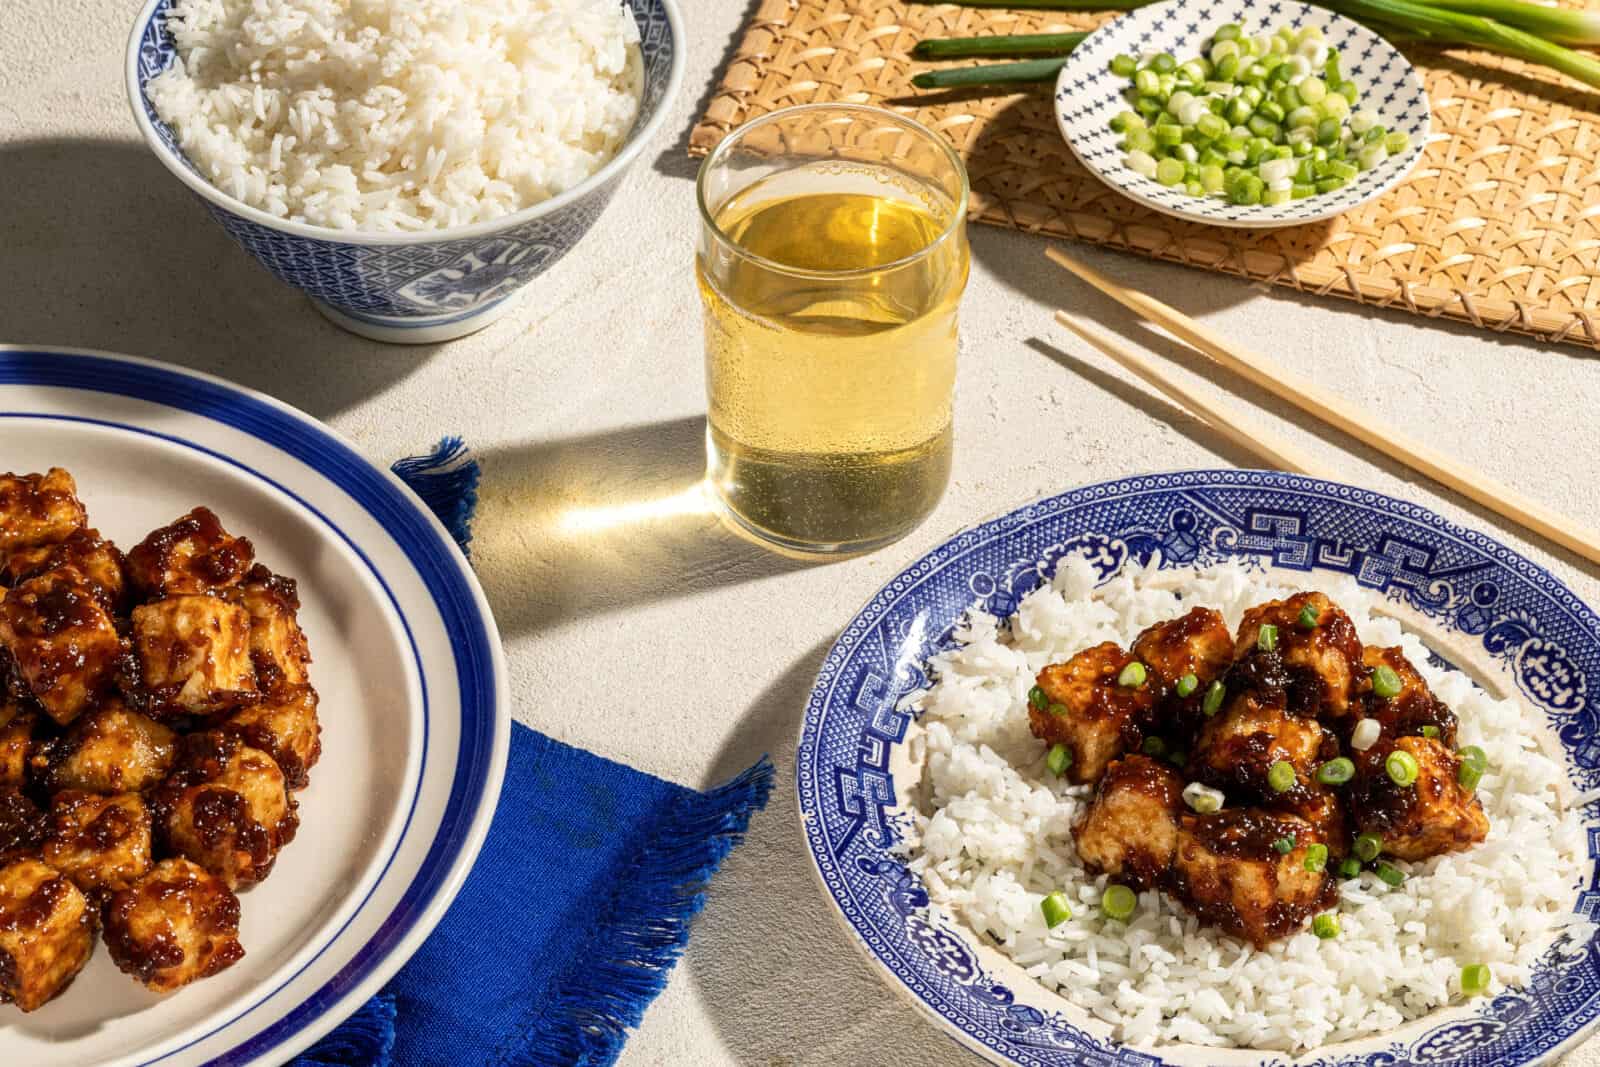 Cider and chinese food pairings